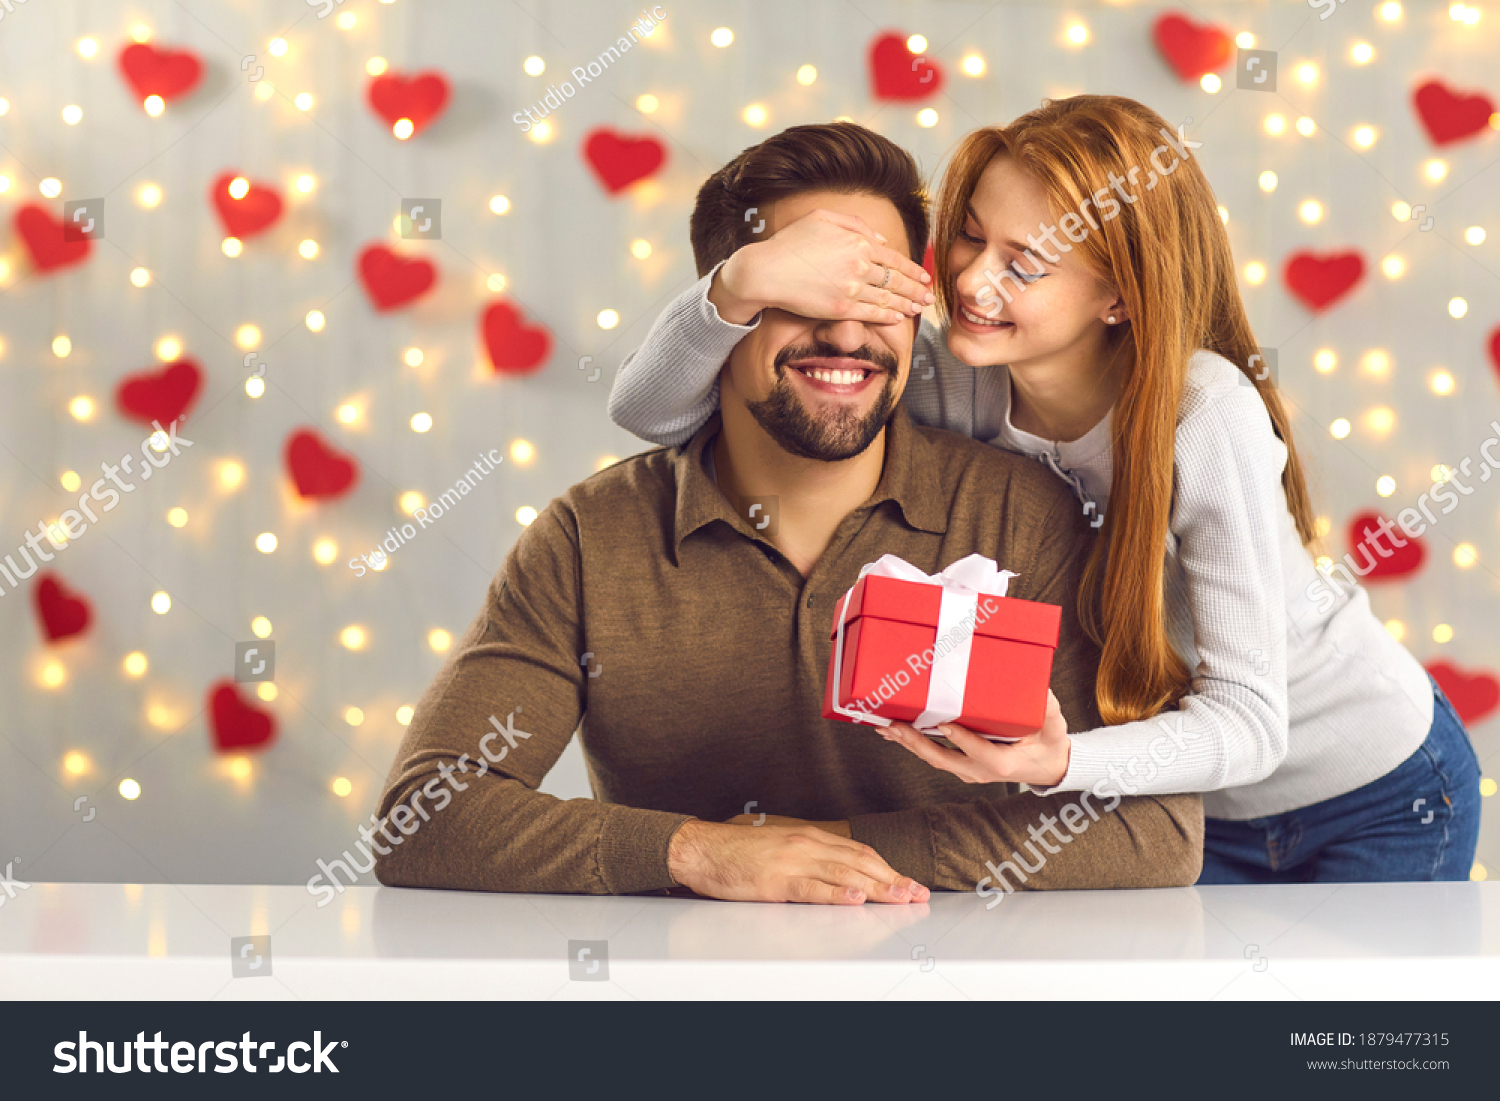 Young couple in love celebrating Saint Valentine's Day or relationship anniversary. Happy woman covering boyfriend's eyes giving him surprise gift. Smiling man getting present from loving girlfriend #1879477315